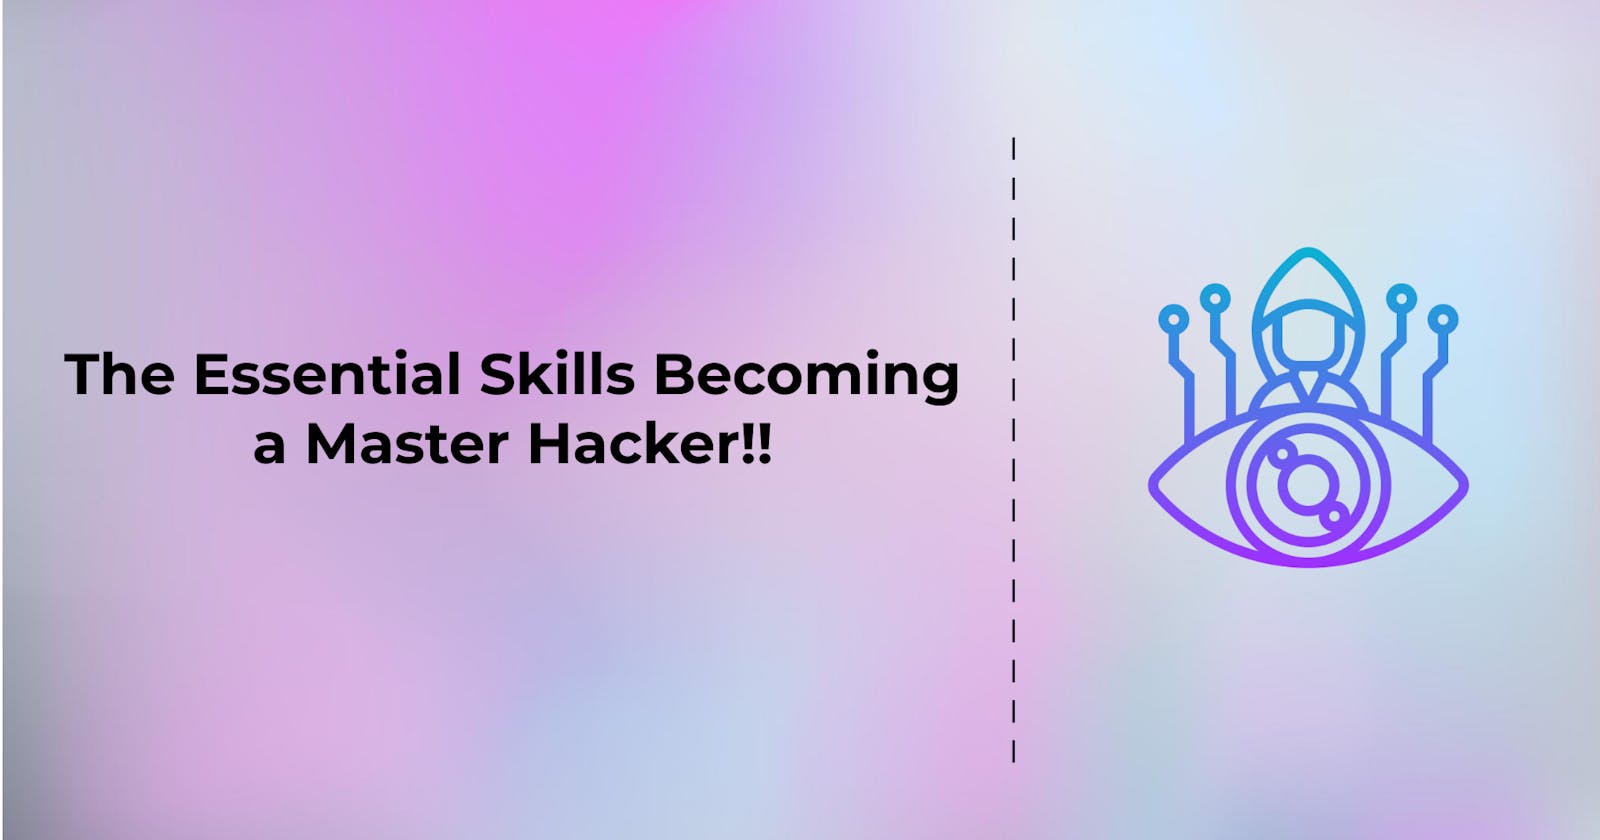 The Essential Skills Becoming a Master Hacker!!